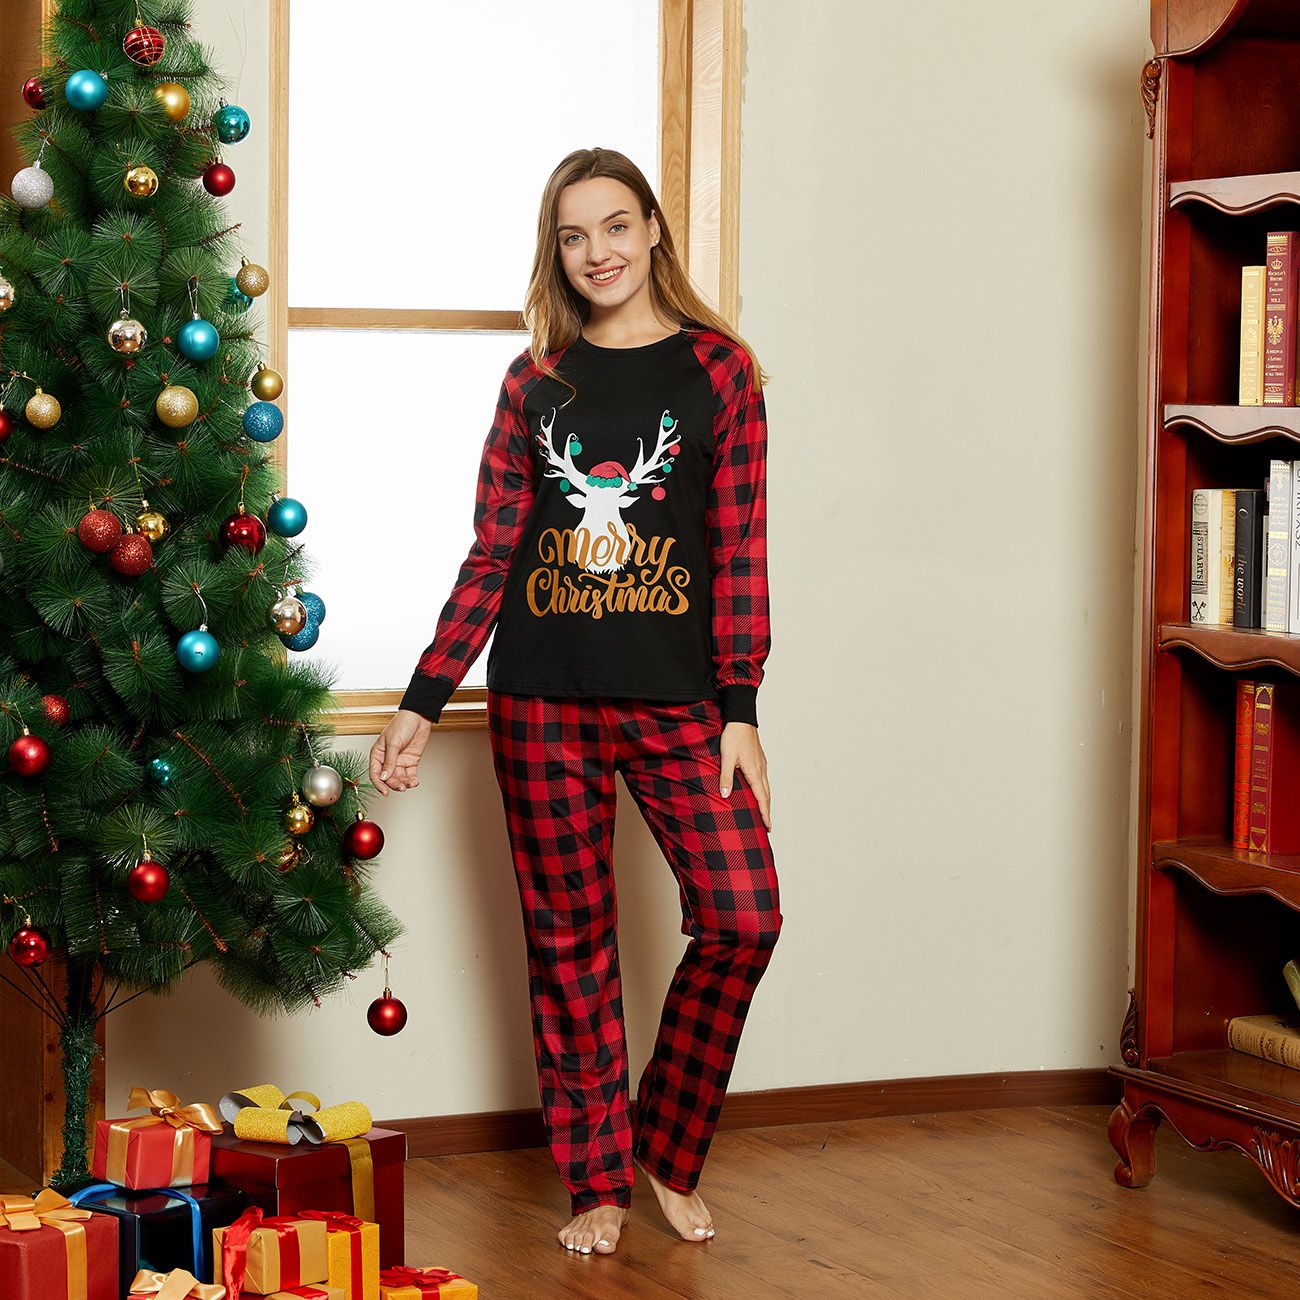 Merry Christmas Letter Antler Print Plaid Splice Matching Pajamas Sets For Family (Flame Resistant)